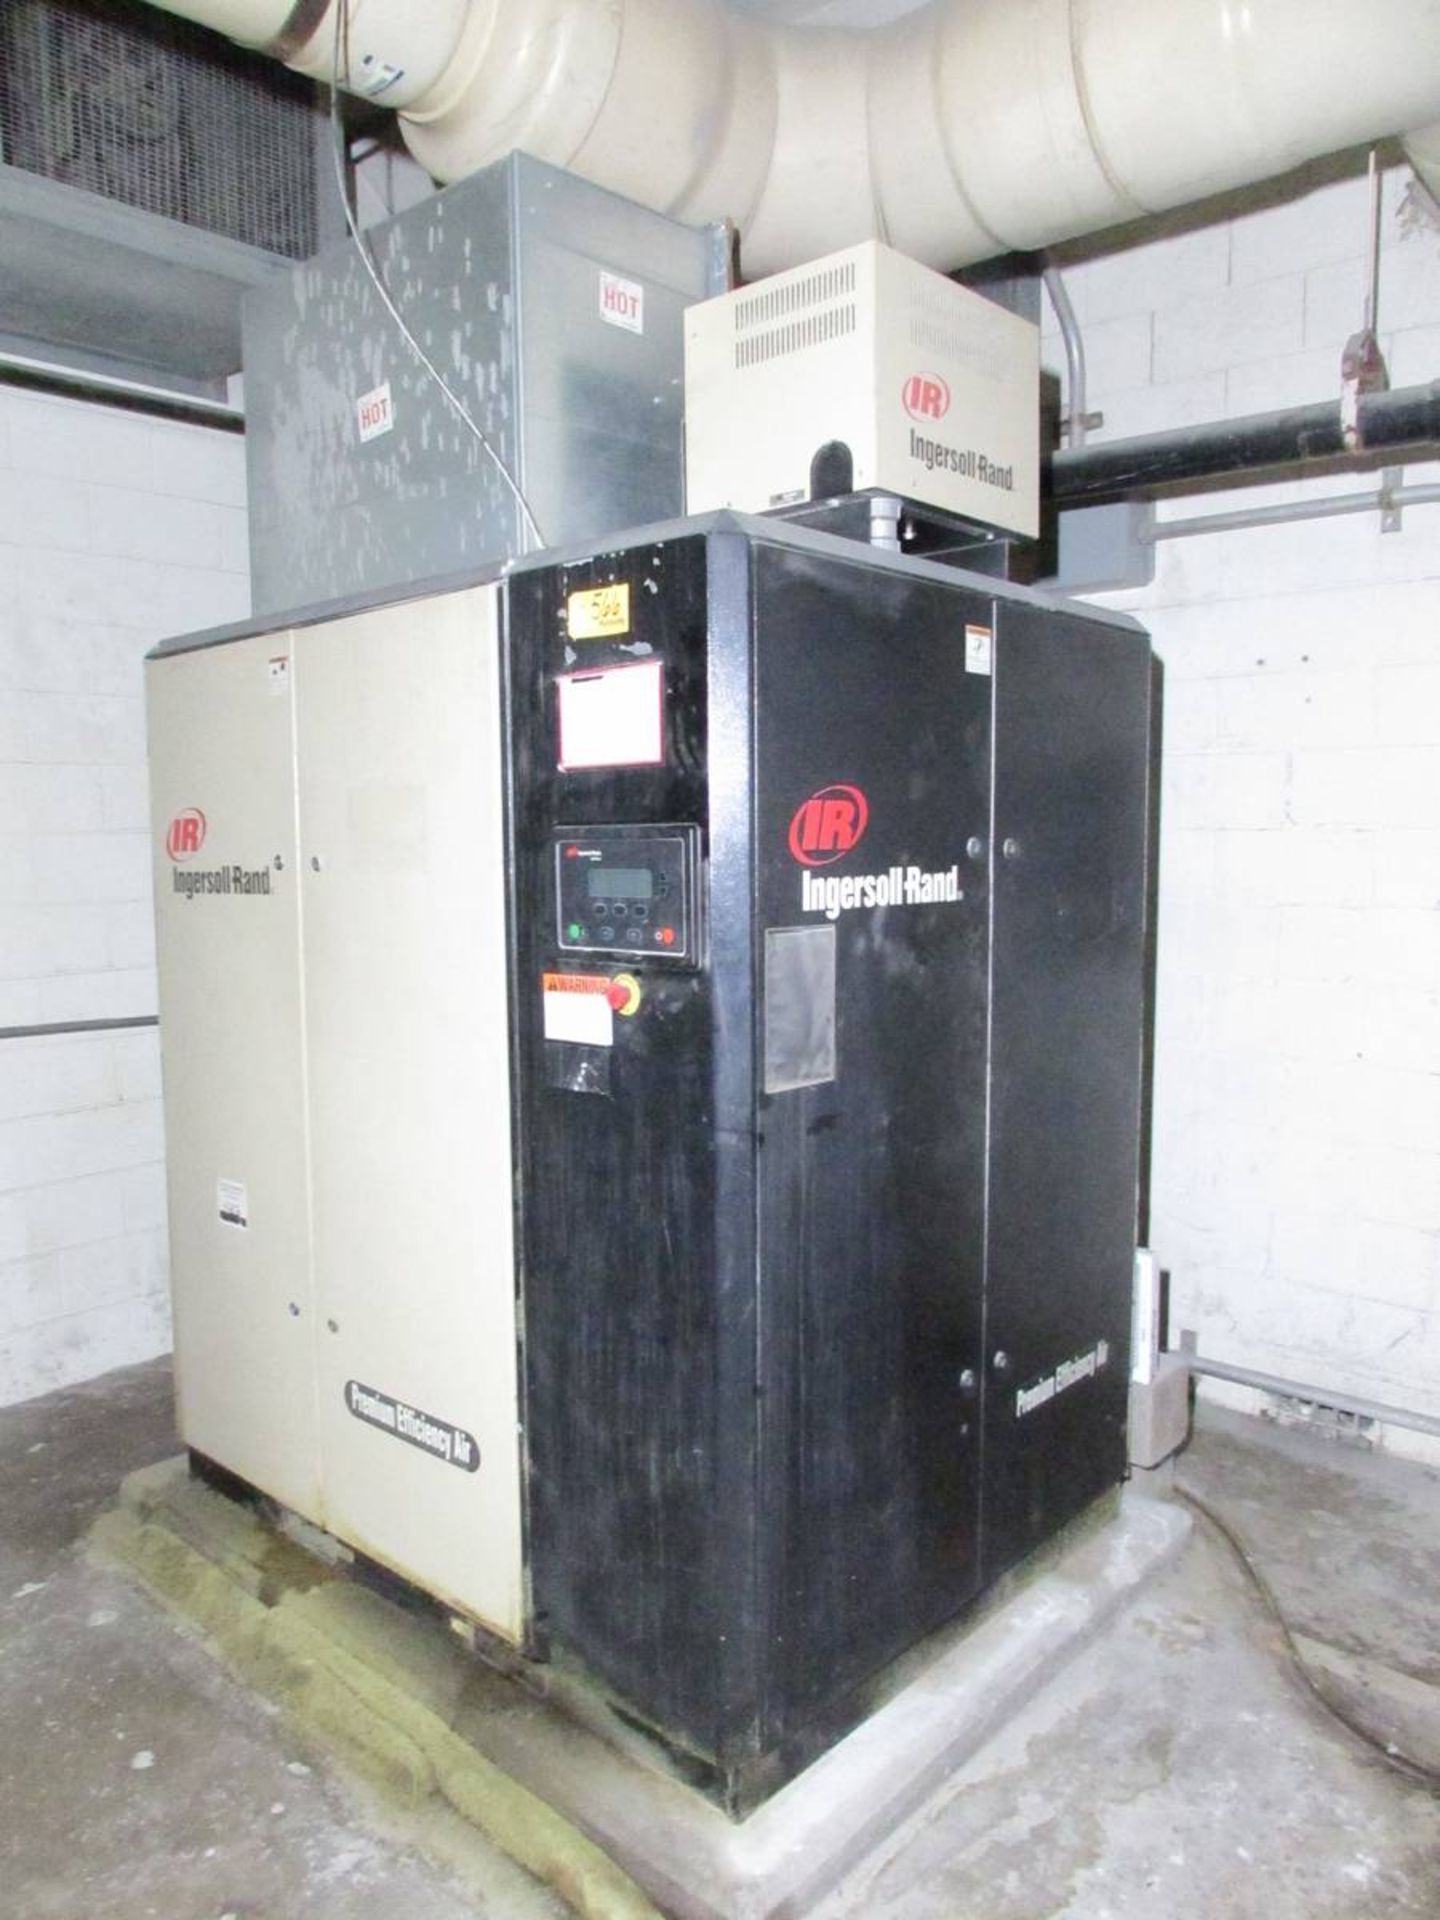 Ingersoll-Rand IRN75H-CC 75HP Rotary Screw Air Compressor - Image 3 of 5